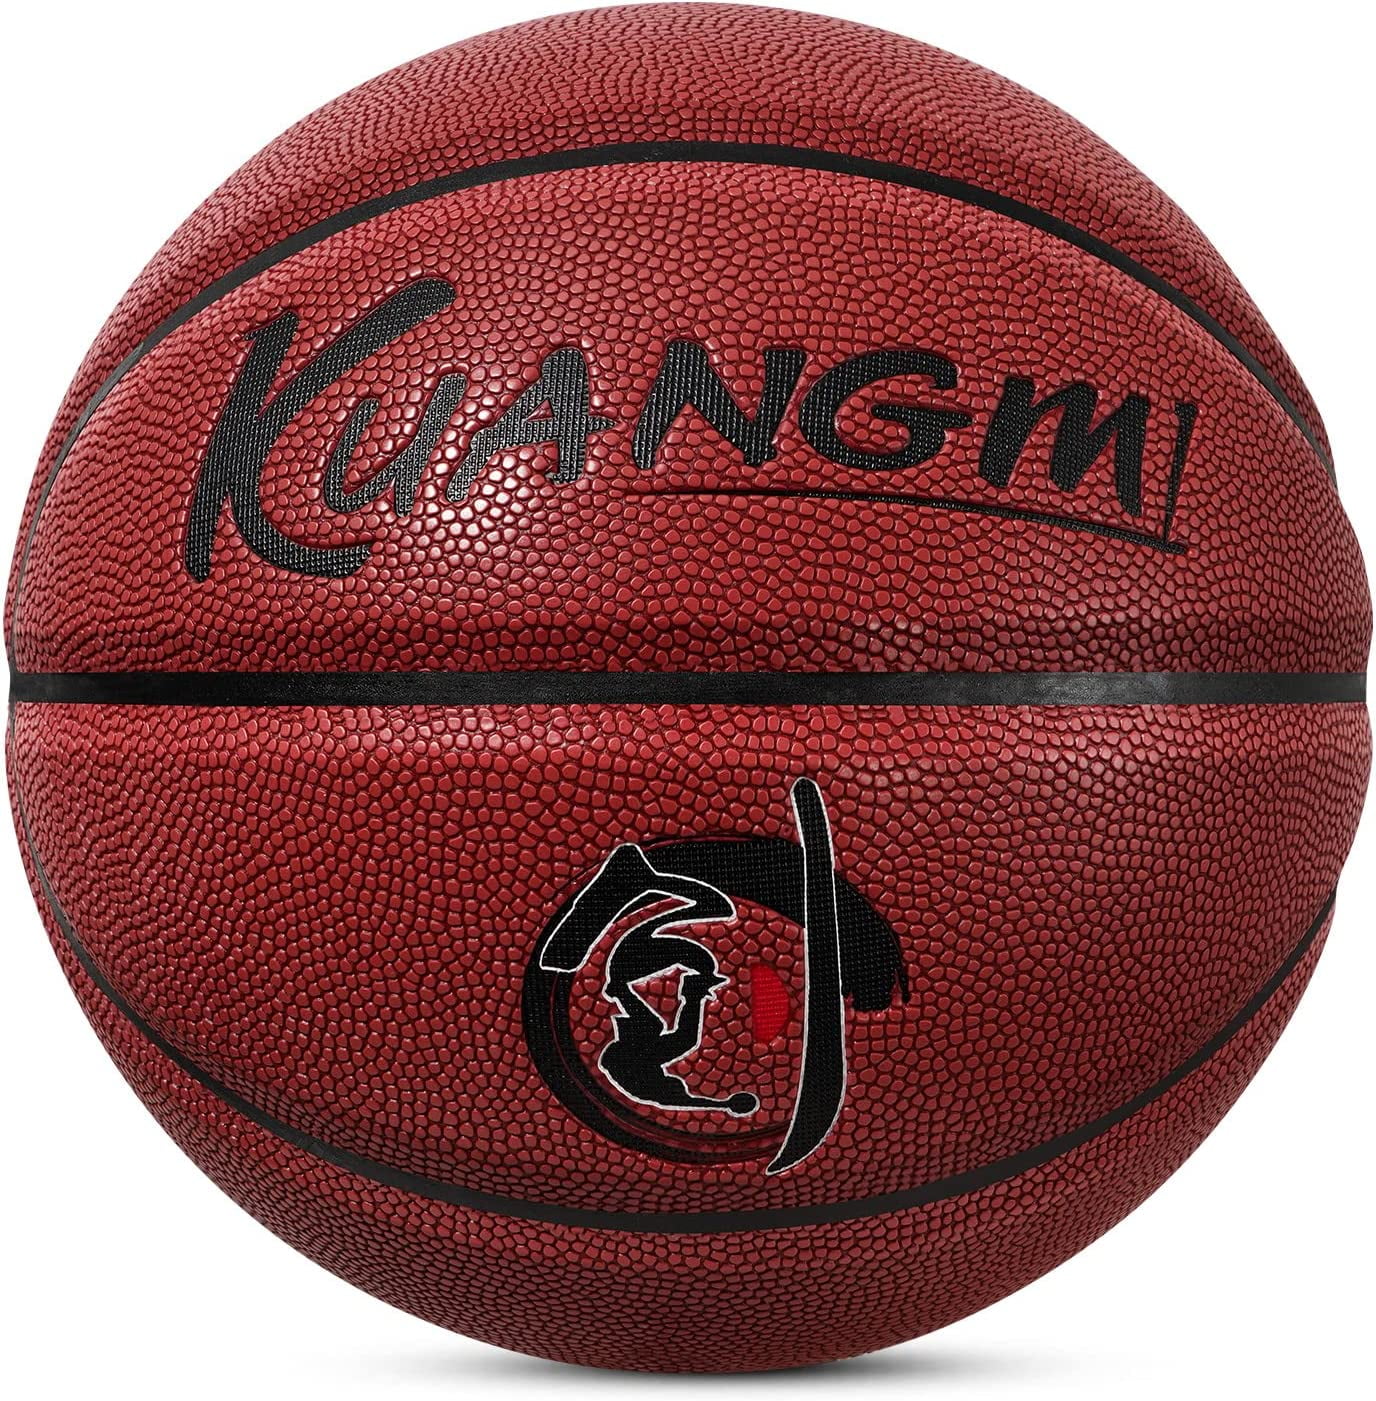 Kuangmi Authentic Series Basketball Made for Indoor Outdoor Game Ball ...